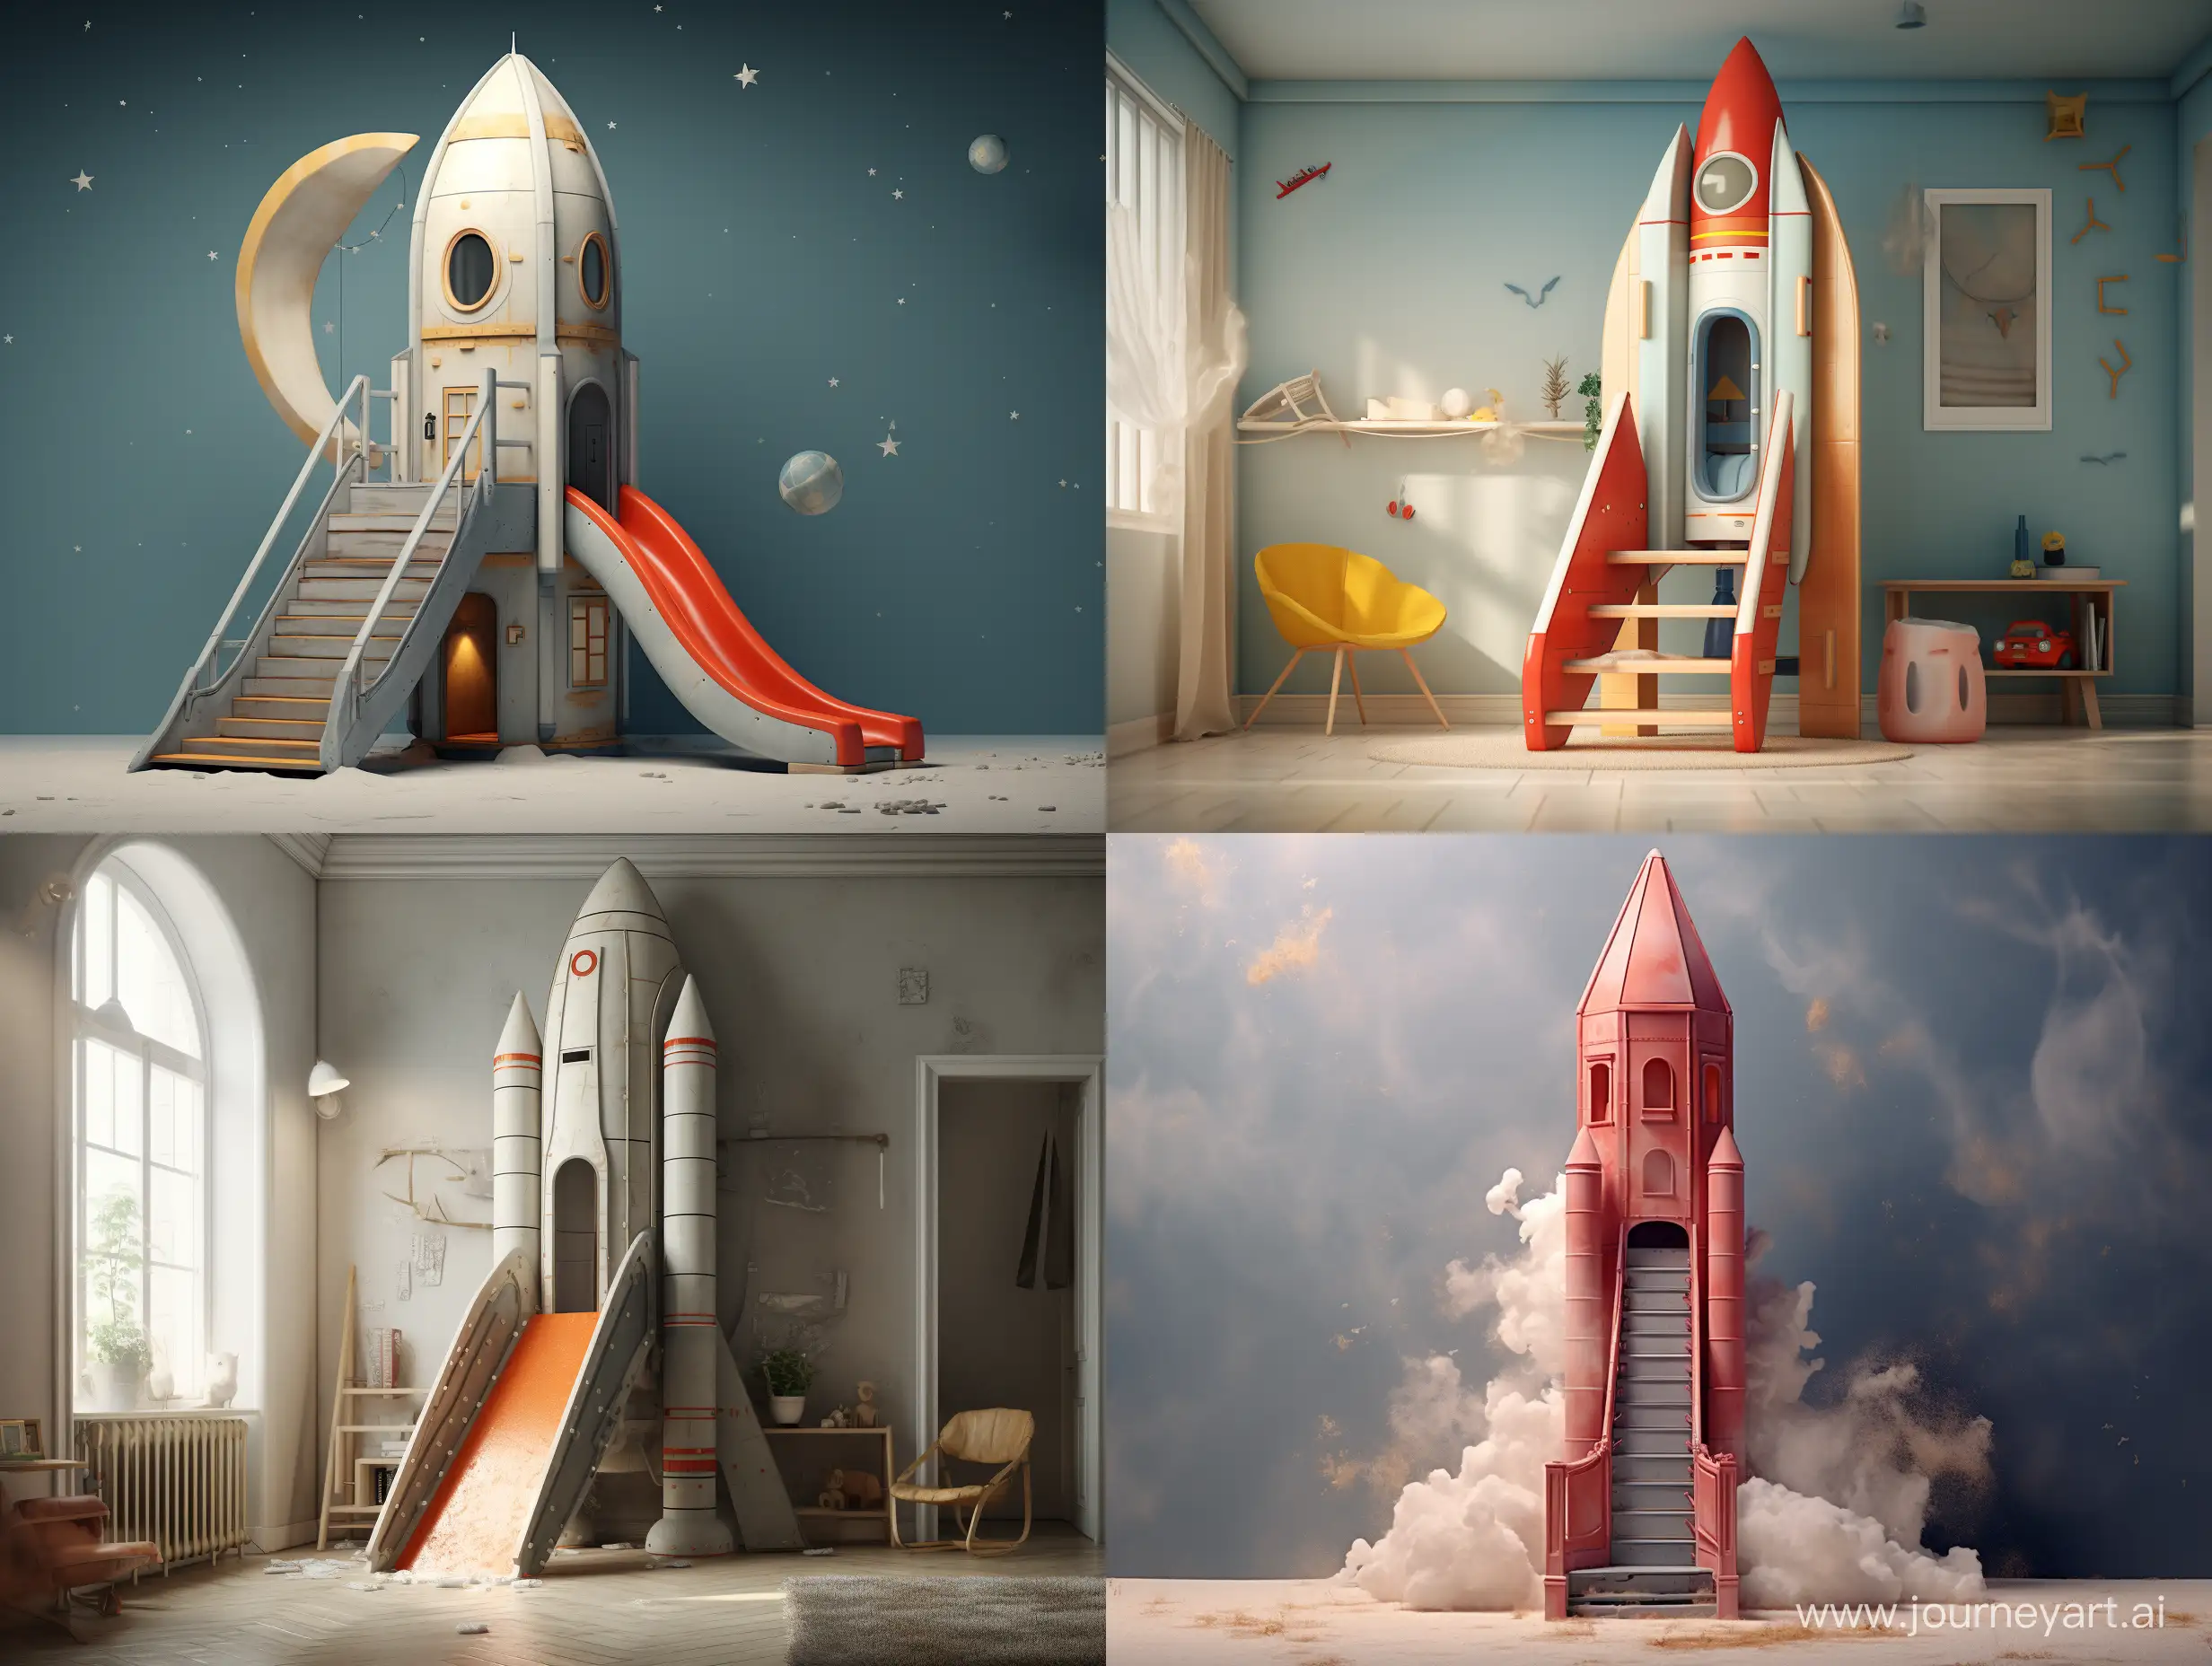 Whimsical-Soft-Rocket-Play-Structure-with-Door-Ladder-and-Slide-for-Creative-Kids